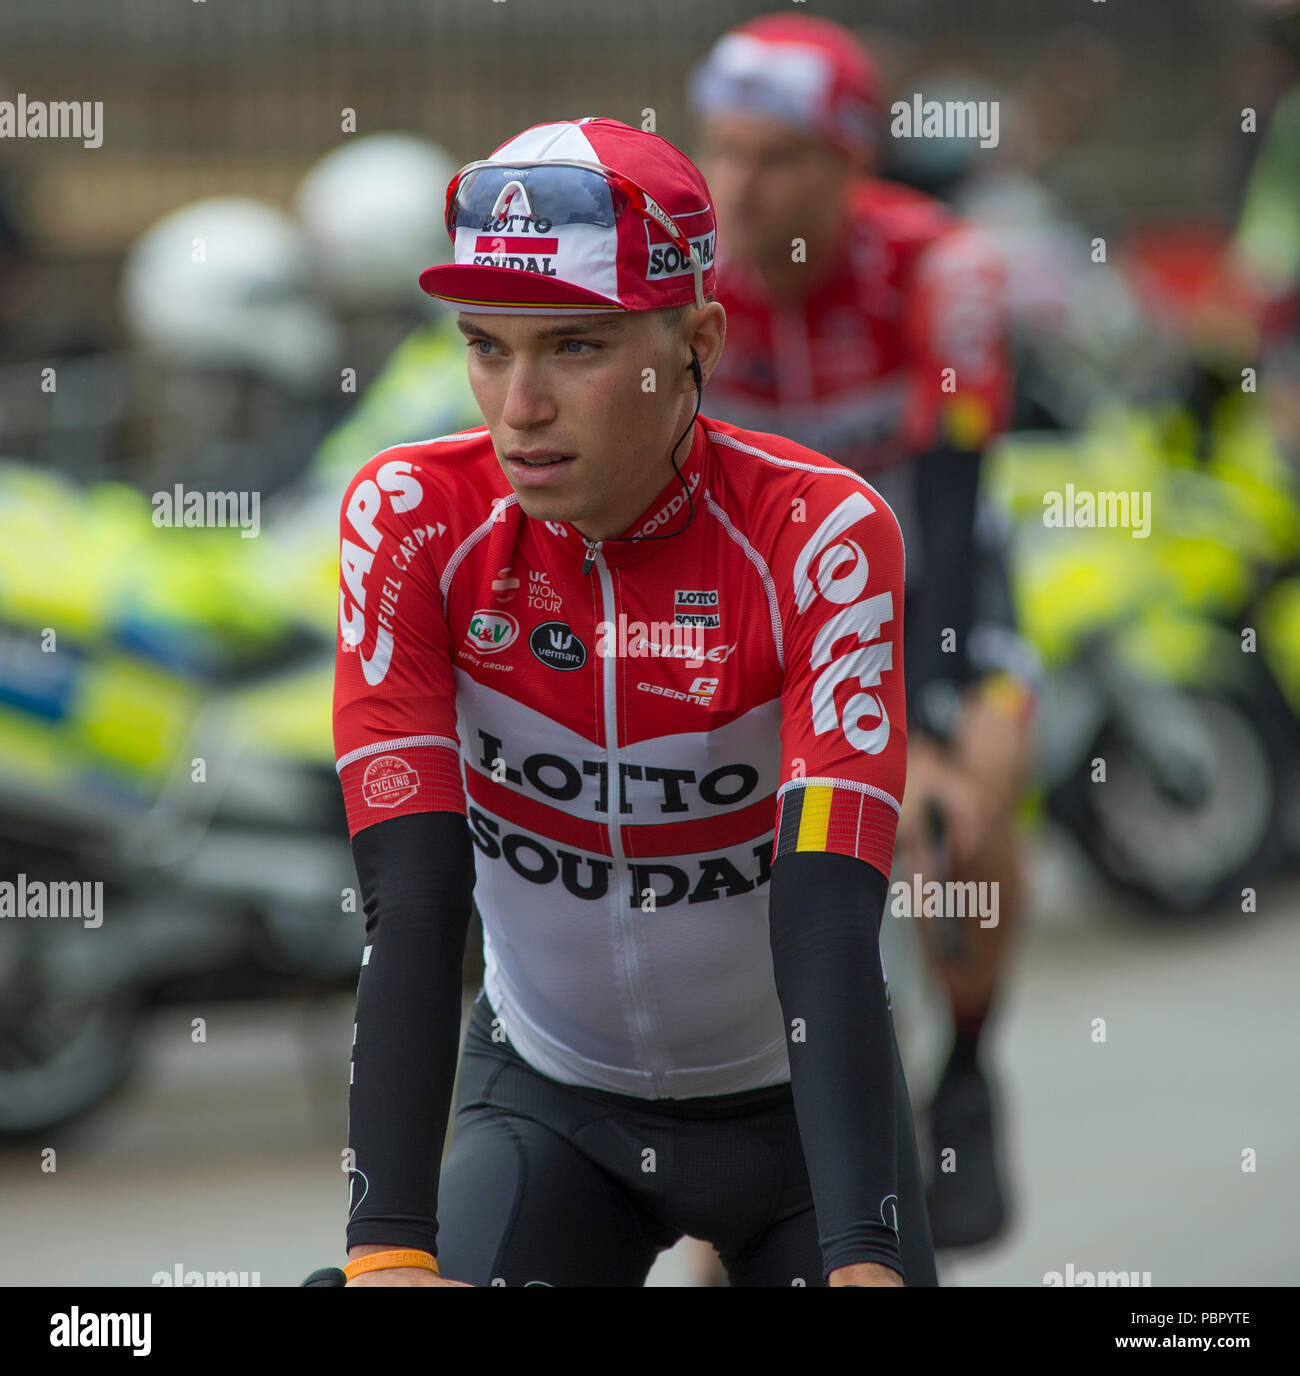 Horse Guards Parade, London, UK. 29 July, 2018. Britain’s only men’s UCI WorldTour race lines up for race start in central London with the riders and teams presented to spectators. Photo: Lotto Soudal Team. Credit: Malcolm Park/Alamy Live News. Stock Photo